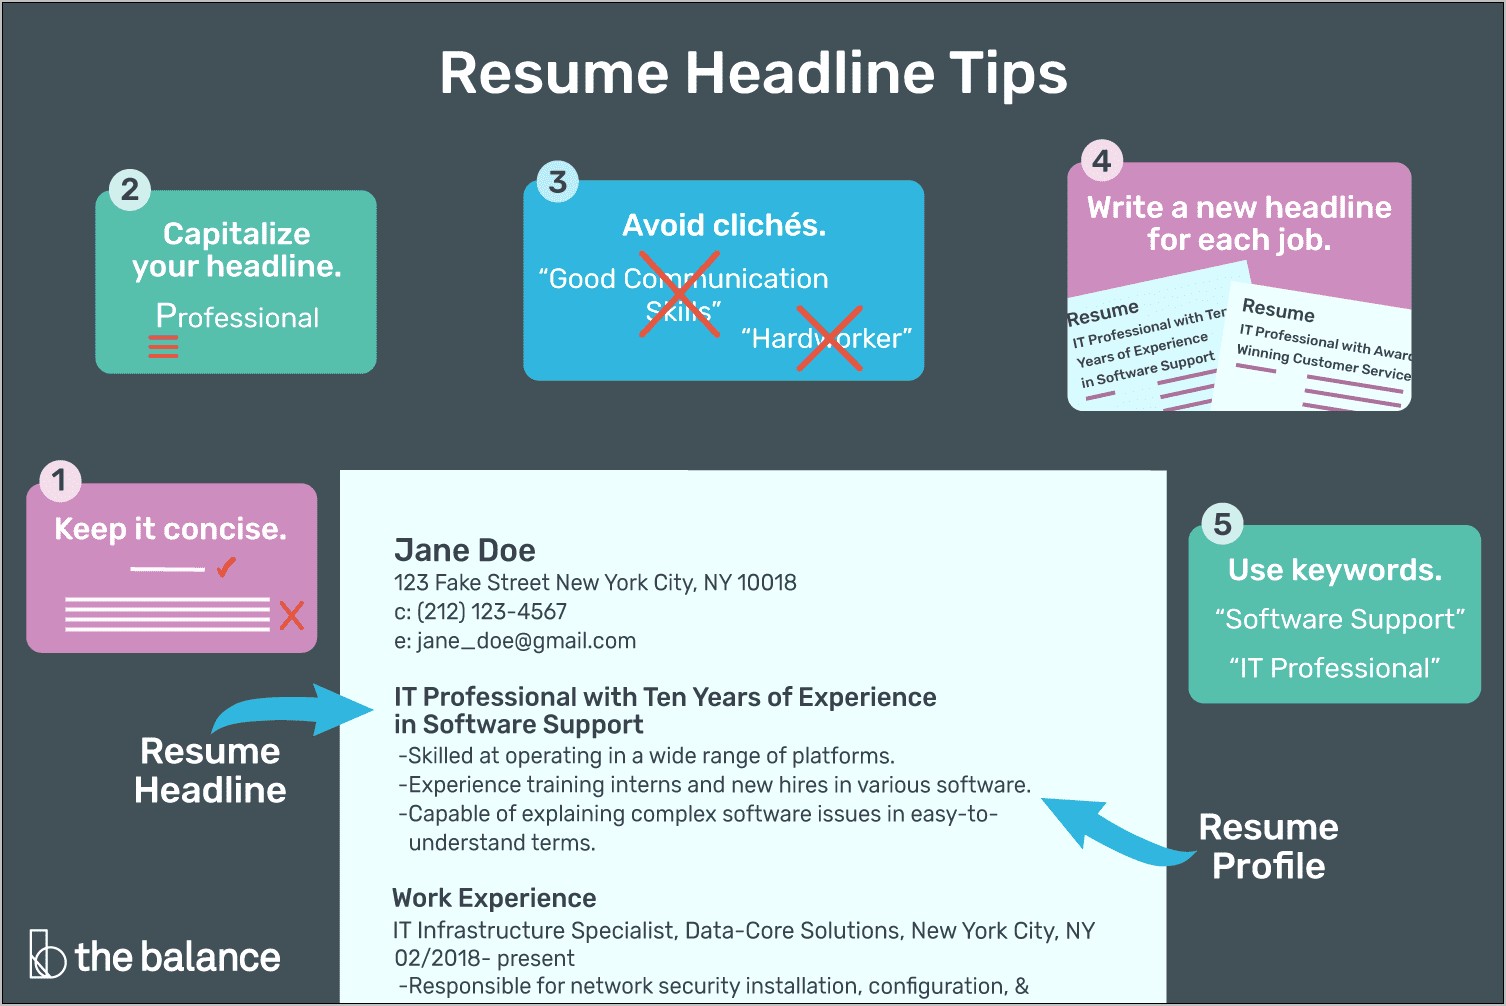 Capitalize Titles Of Jobs On A Resume